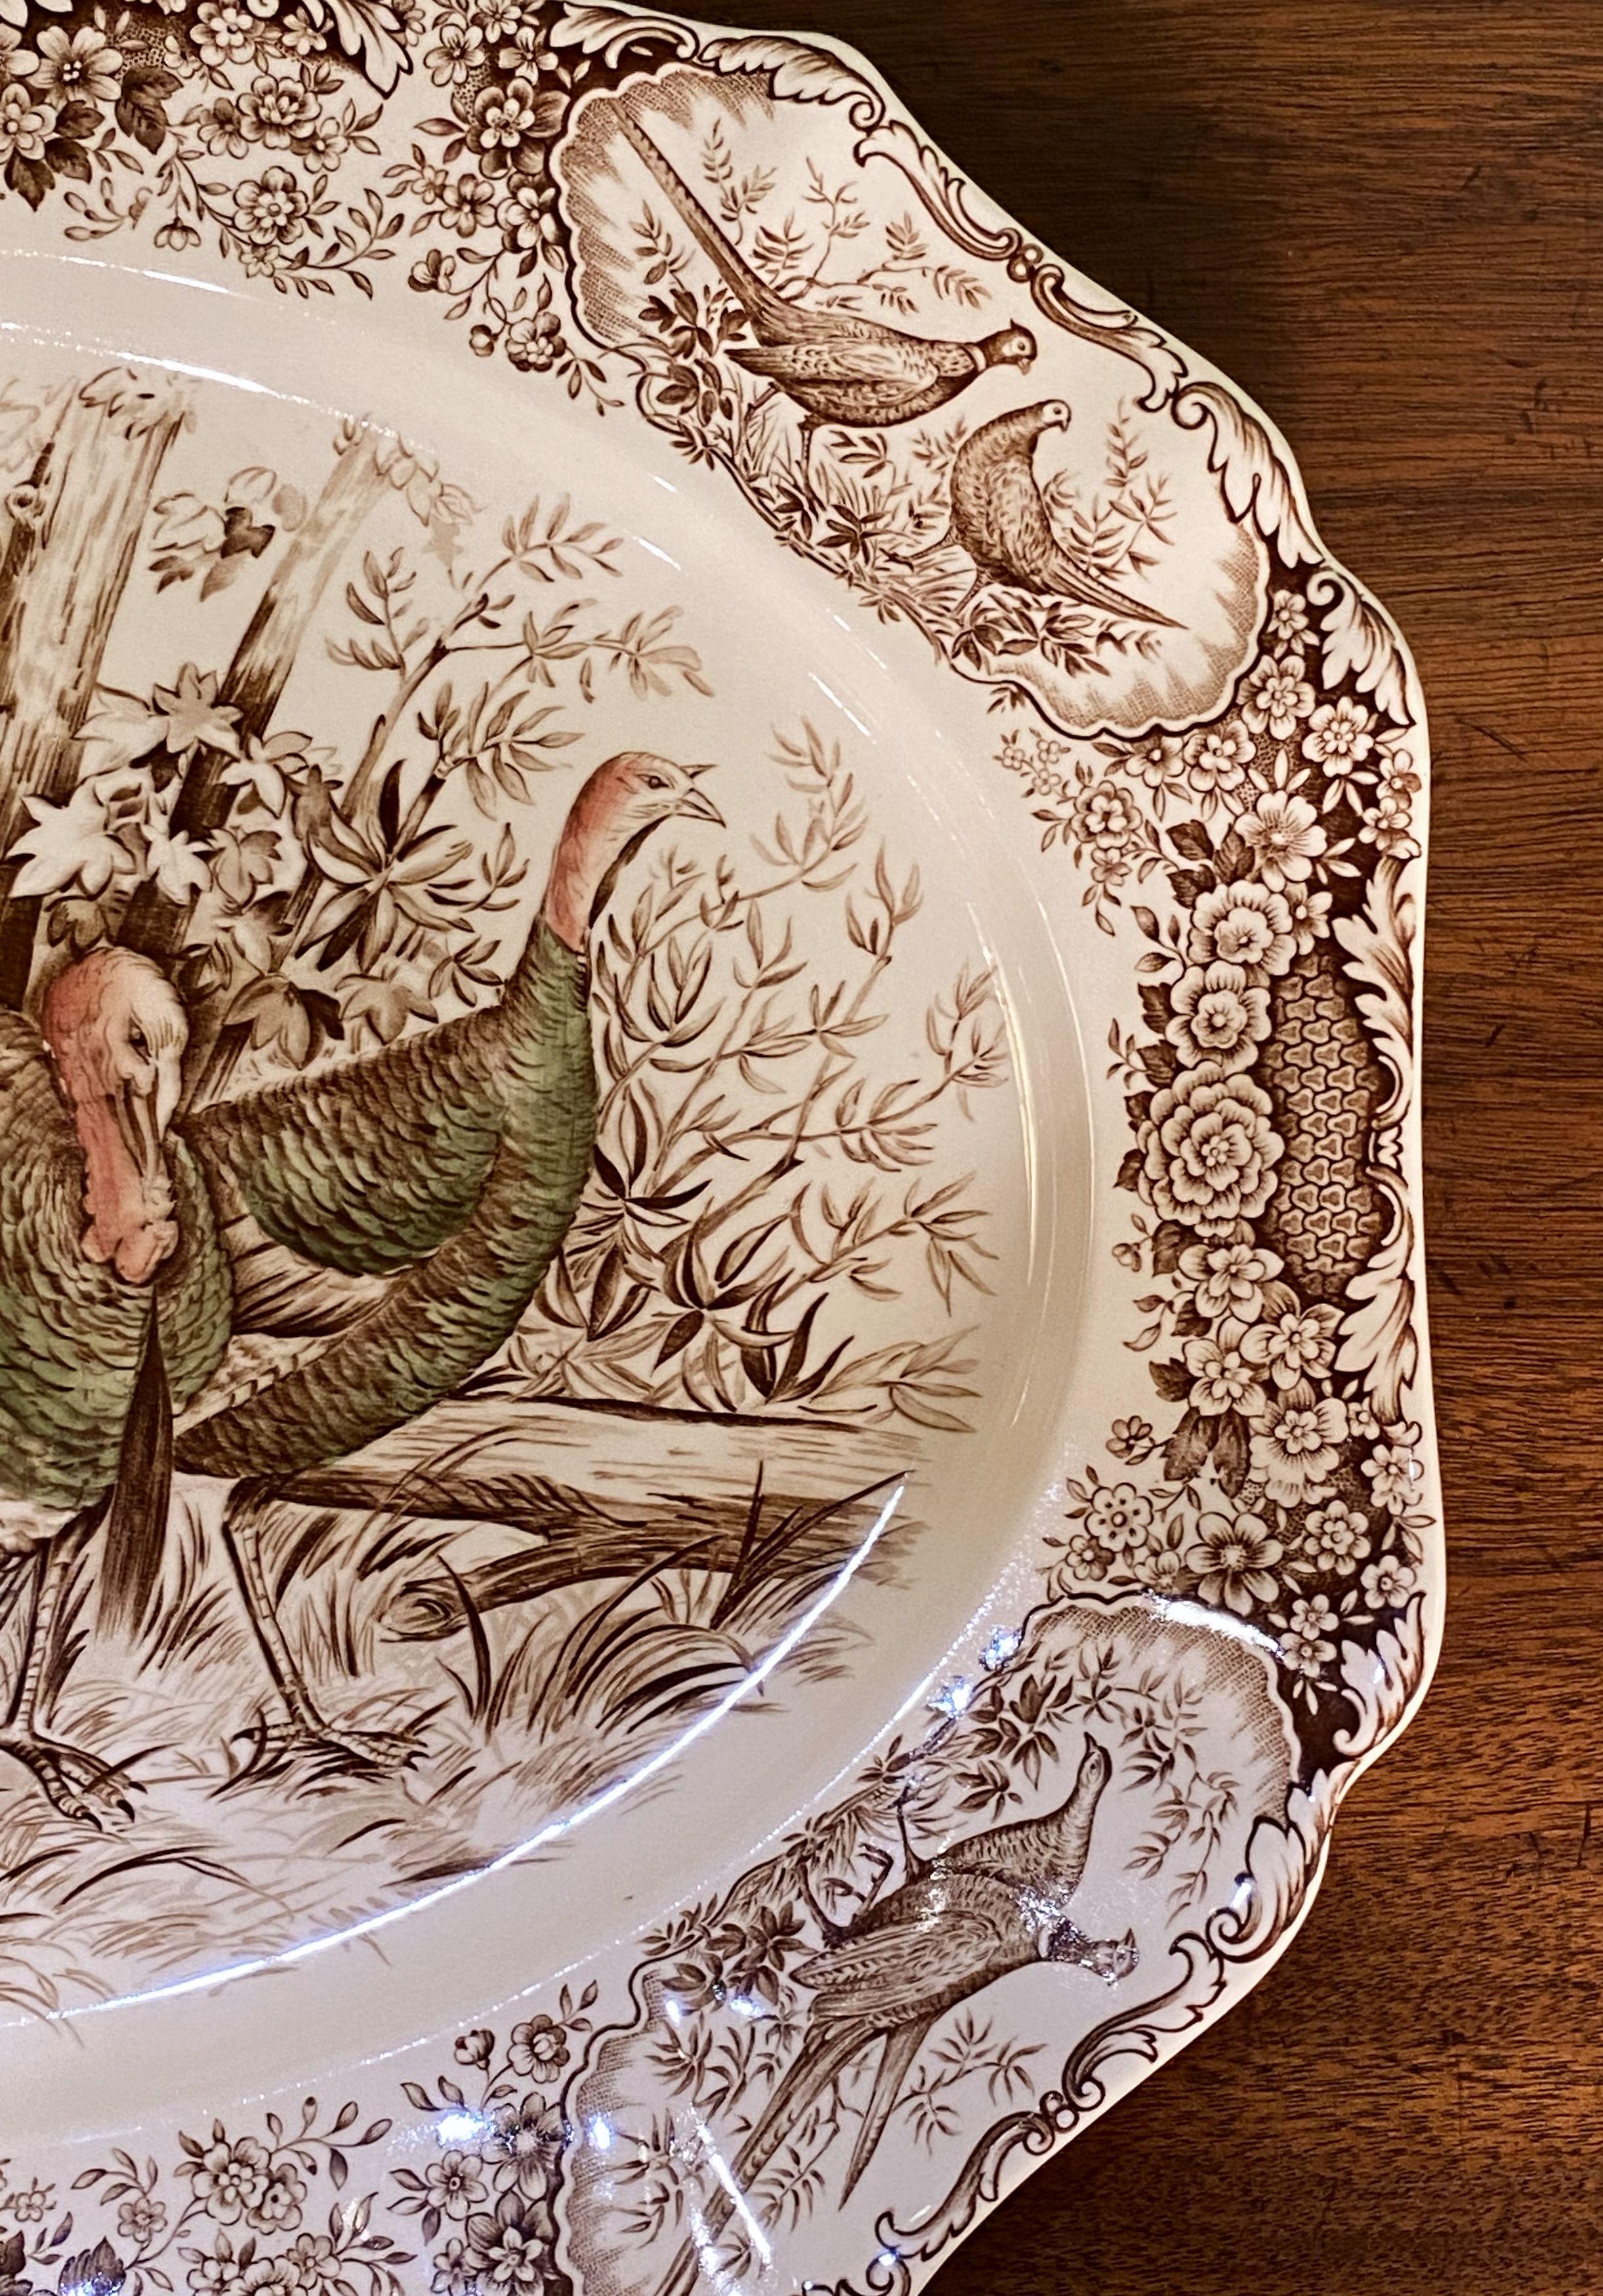 20th Century English Transferware Large Turkey Platter, Native American by Johnson Brothers For Sale